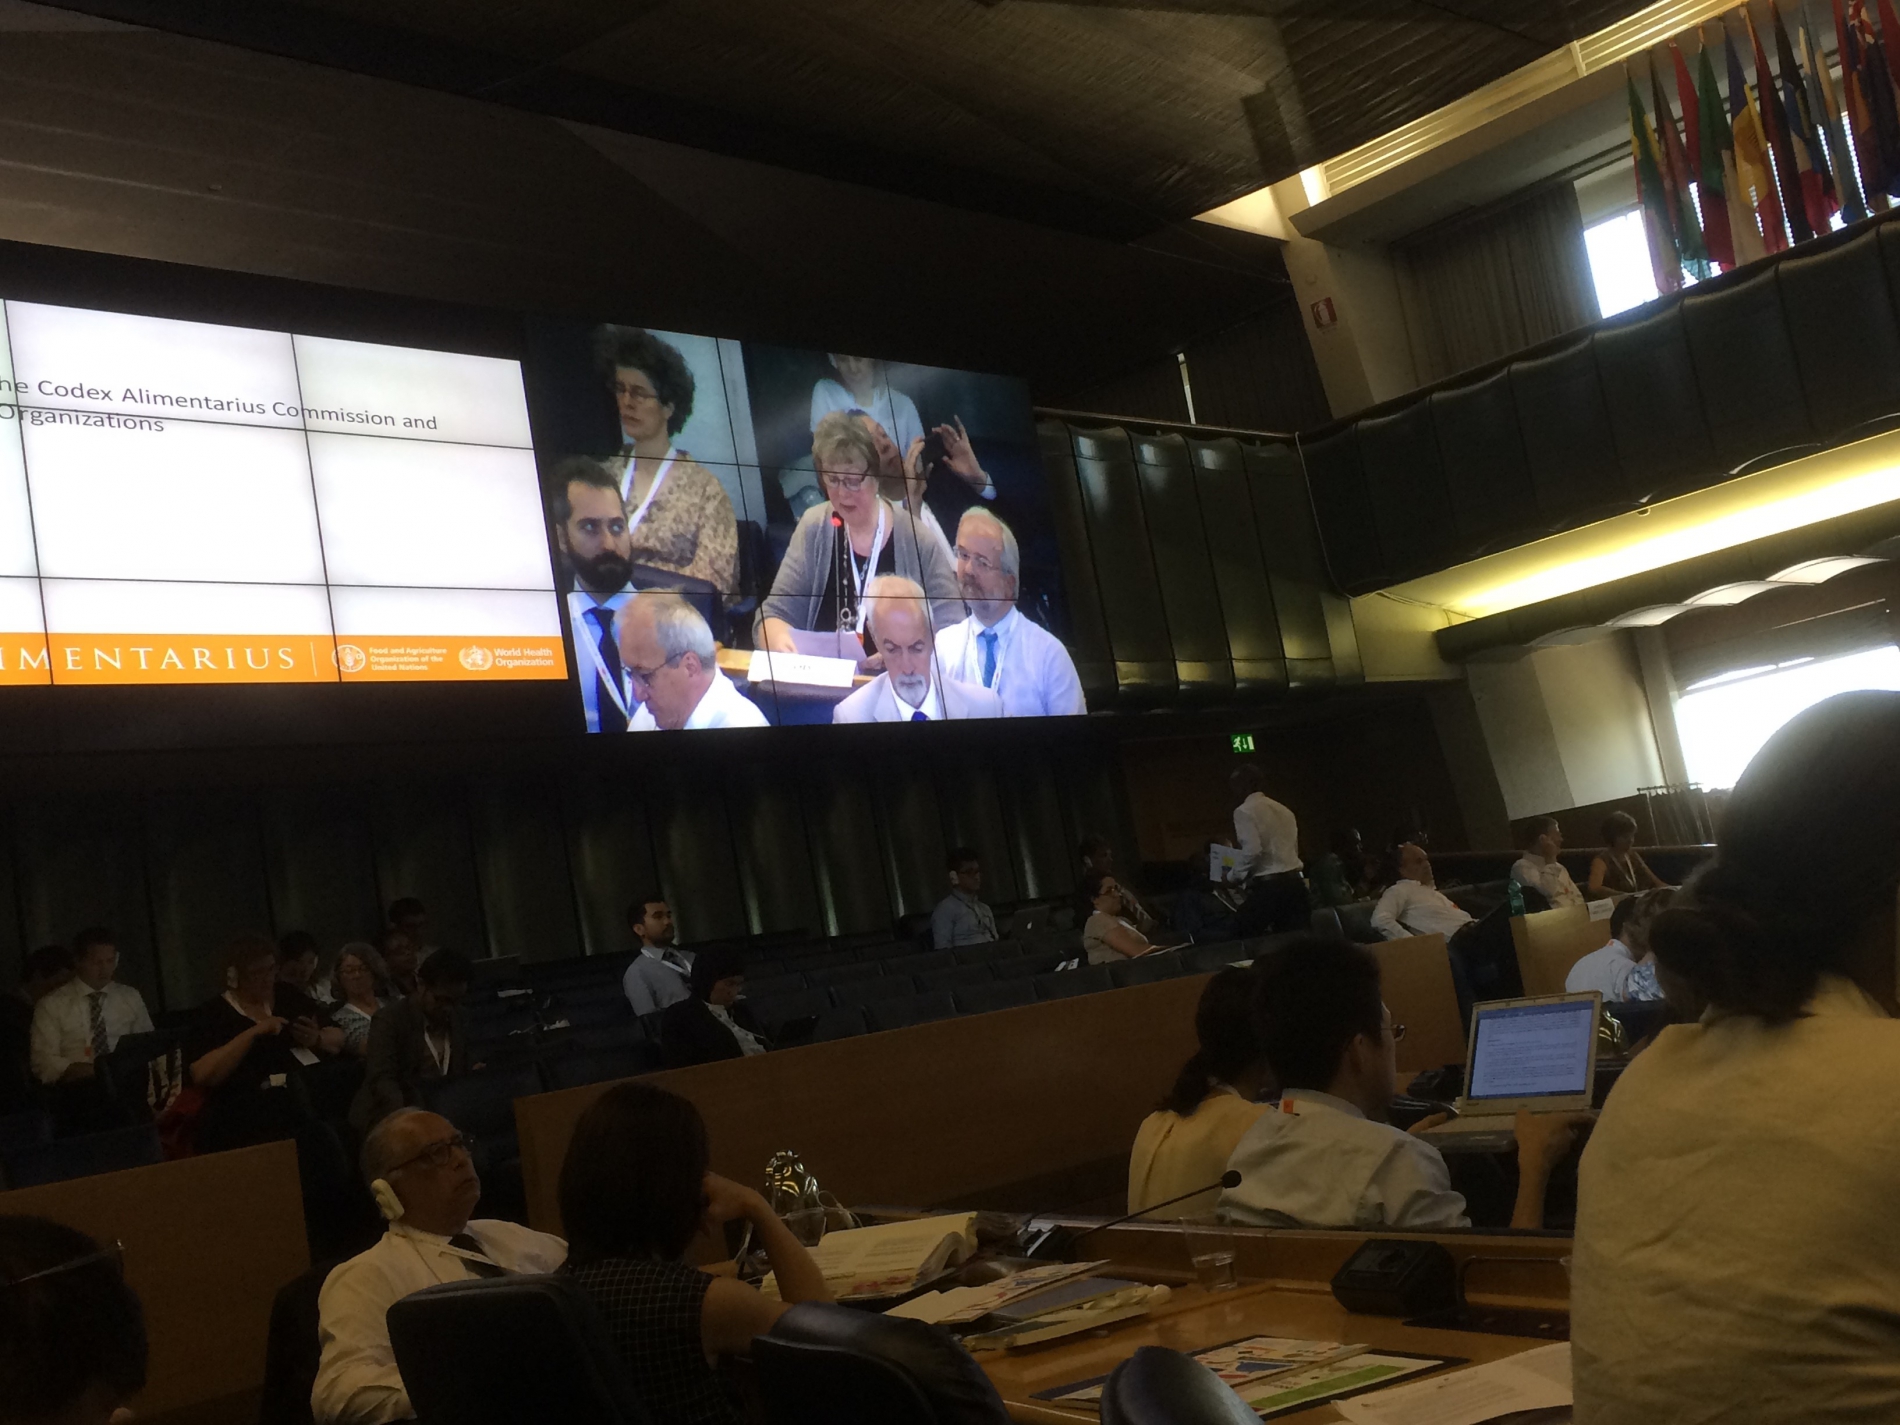 OIV participates at the 39th session of the Codex Alimentarius Commission